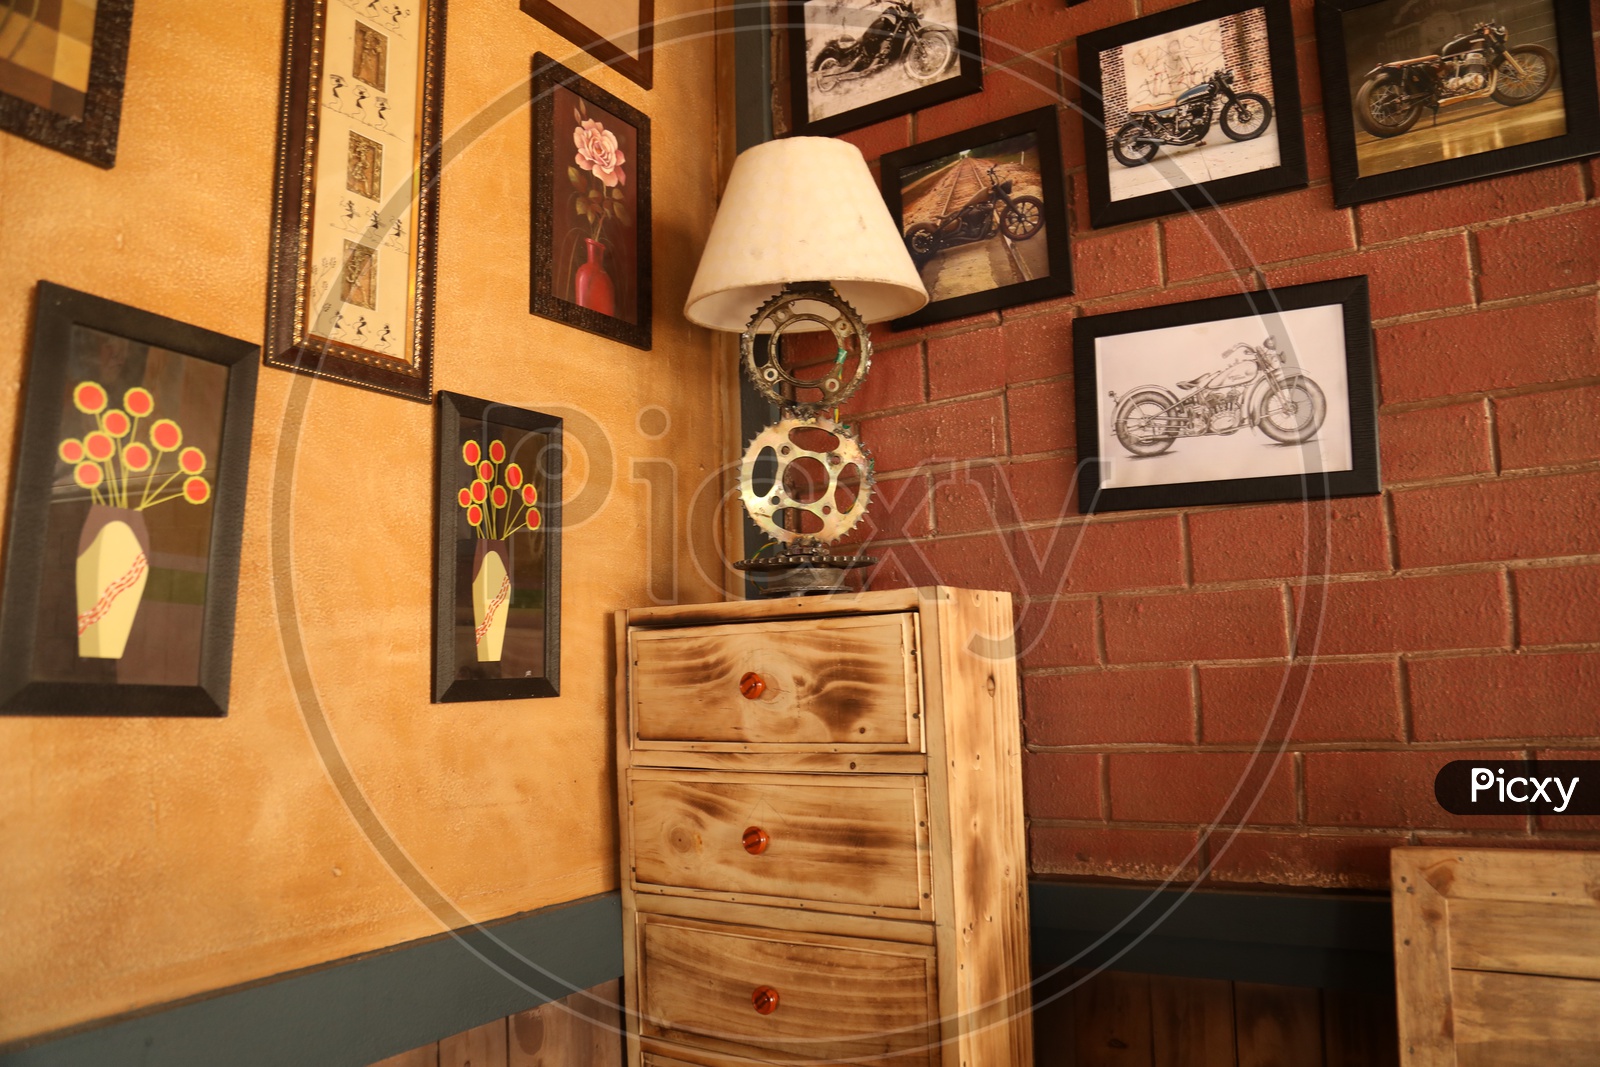 Interior Design Of a Room With Gear Wheels And Motor Bike Frames